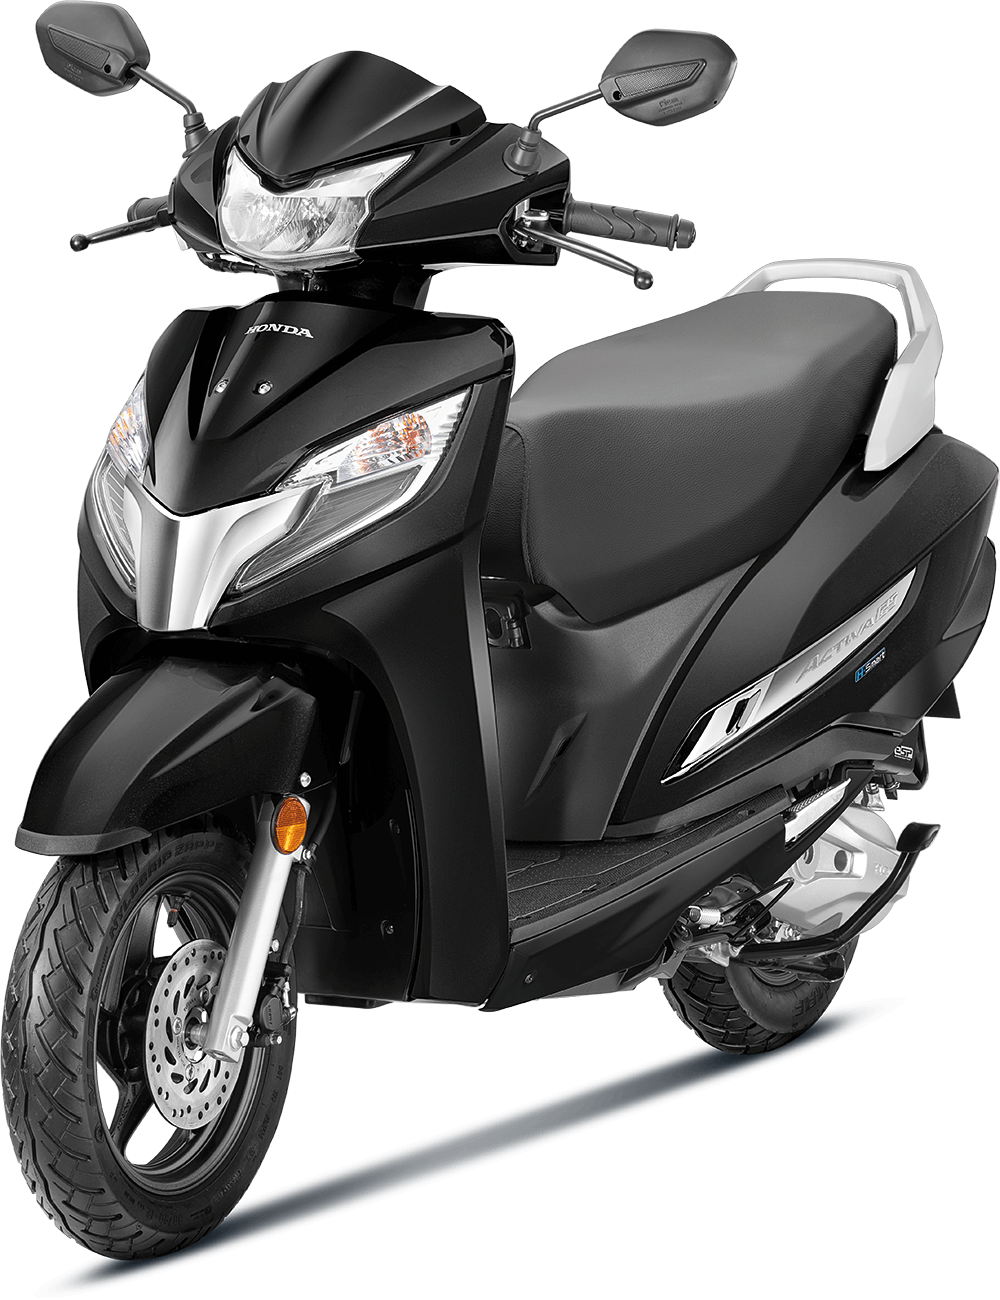 Available Pearl Night Star Black Honda Activa 125 OBD2 at reasonable price exclusively at Rushabh Honda, Nashik. Best Two wheeler Honda Dealers for years.